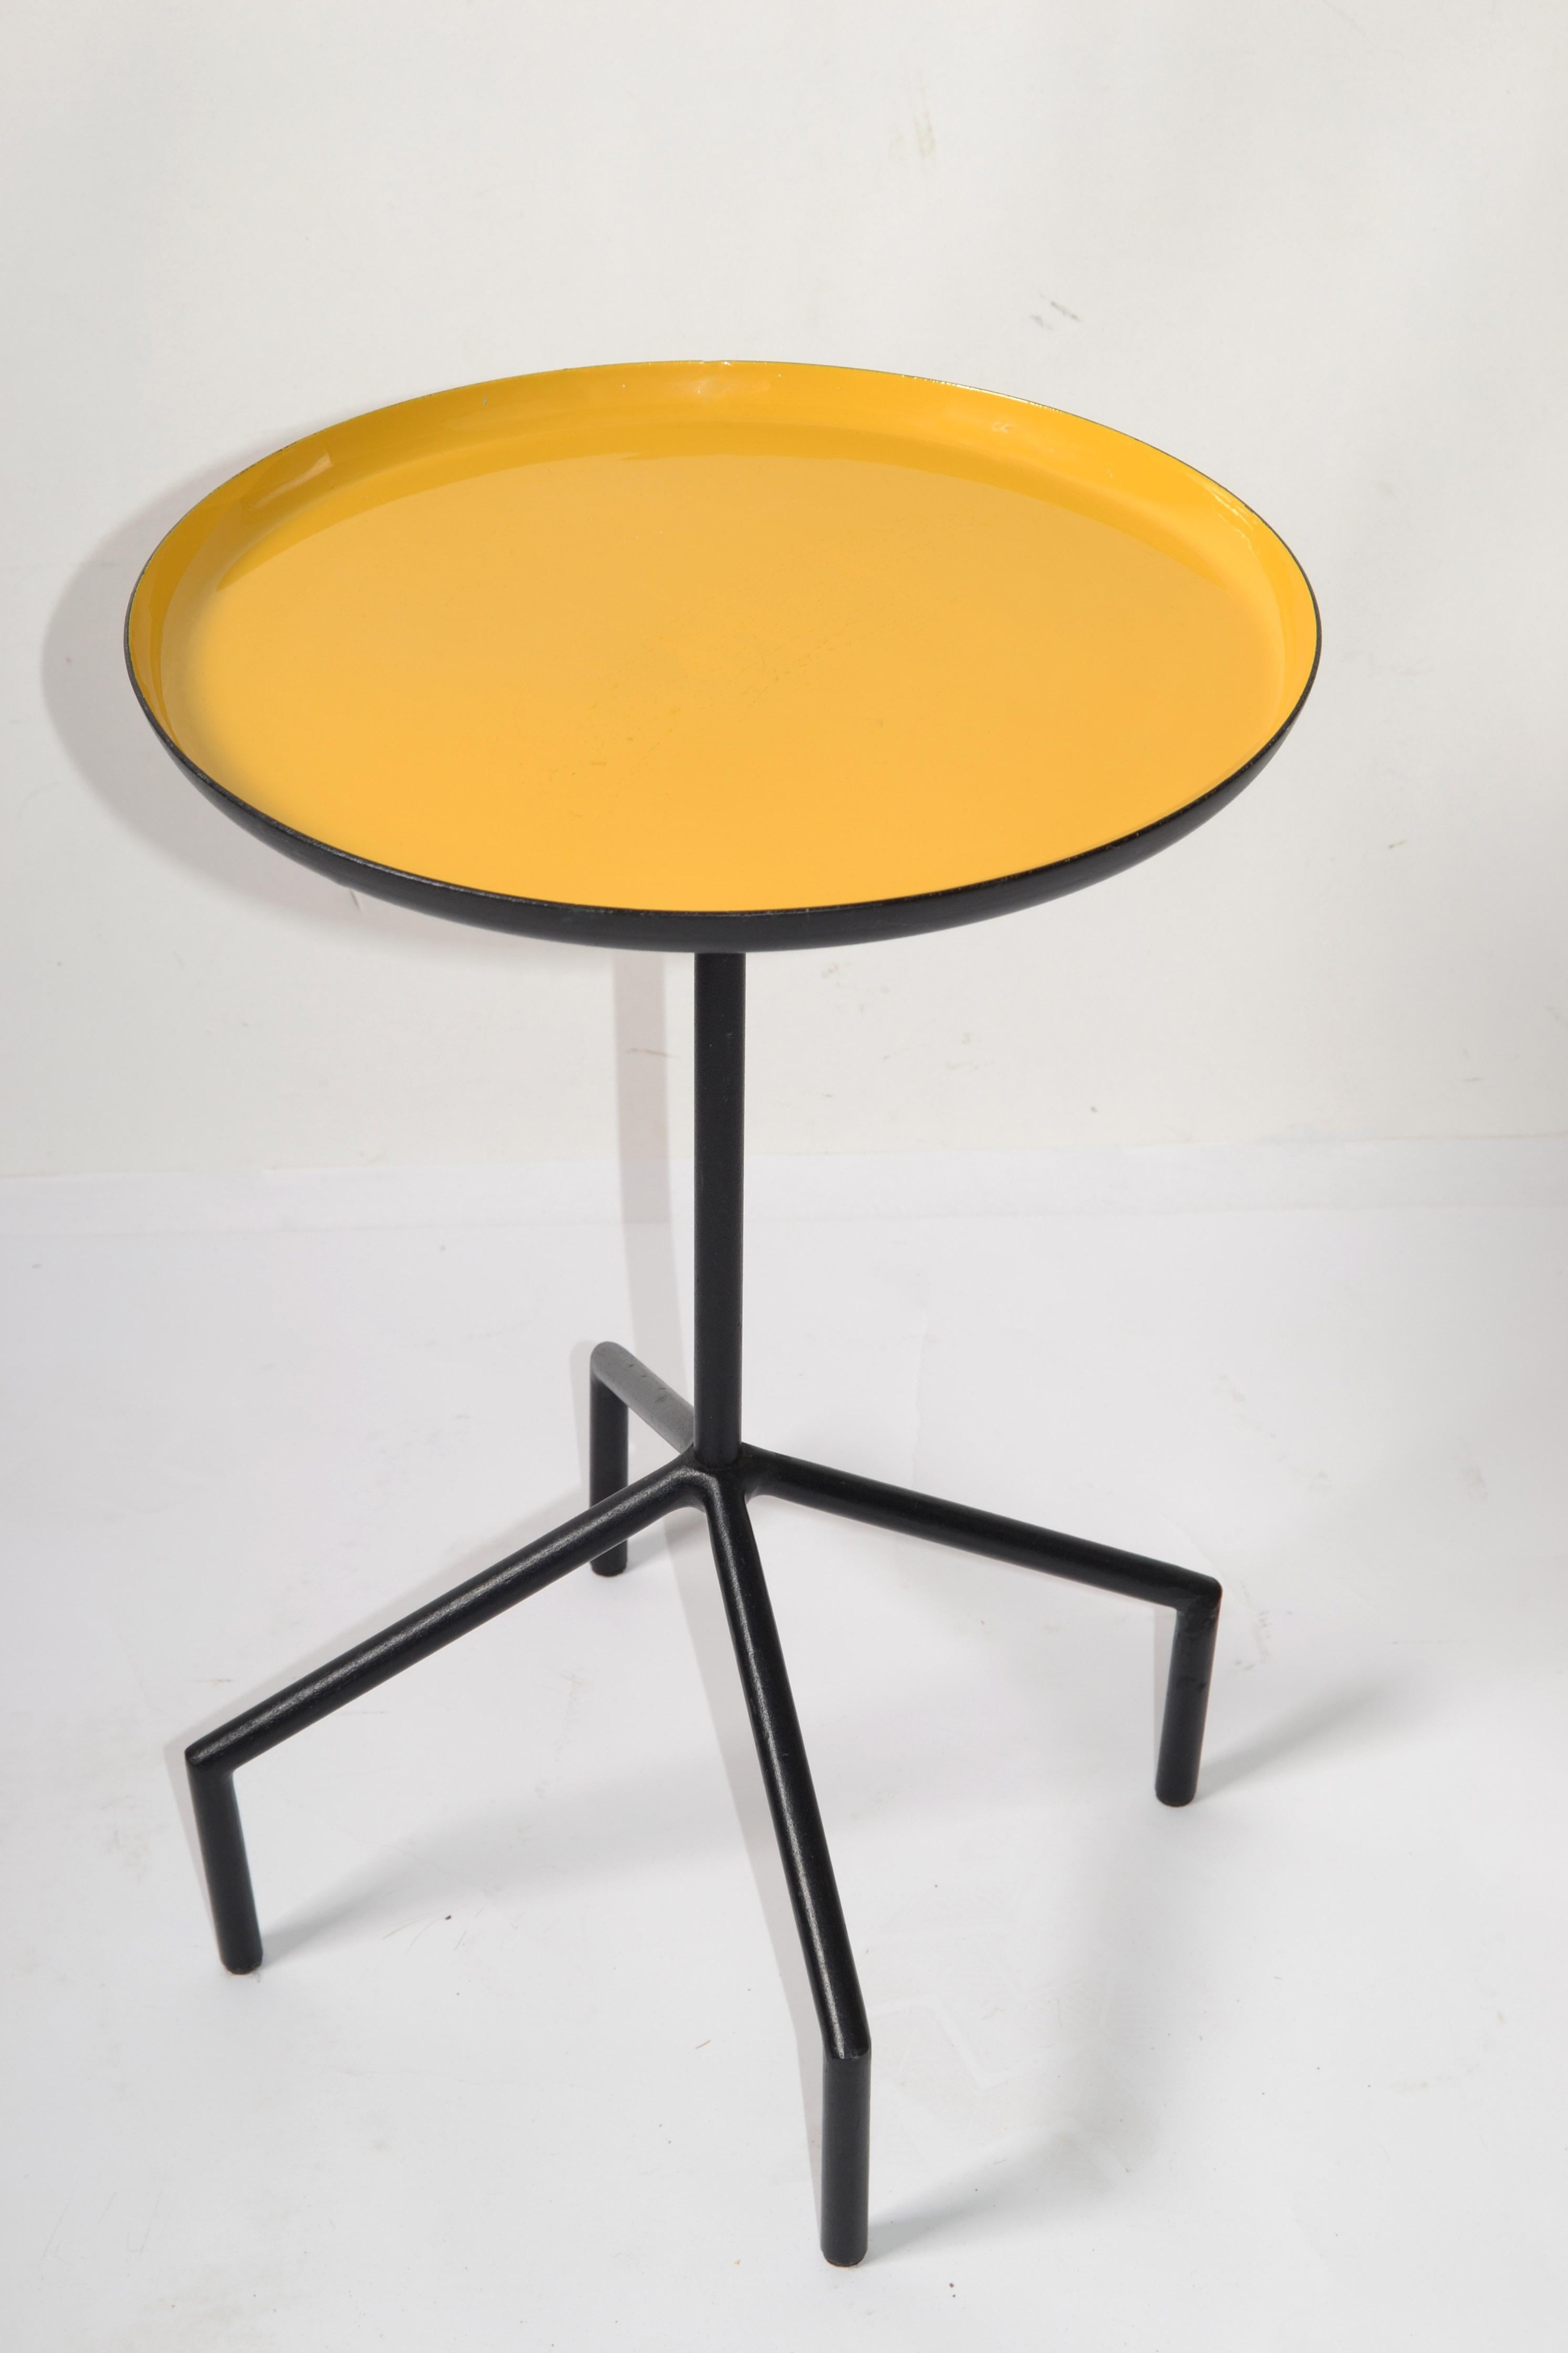 Vintage Mid-Century Modern Round Yellow Side, Tray and Drink Table with Black Iron Gazelle Legs Base in the Style of Herman Miller.
Very Retro Yellow Color Pop Tray Top in Enamel with Black Finish Base.
The Iron Table can be disassembled for